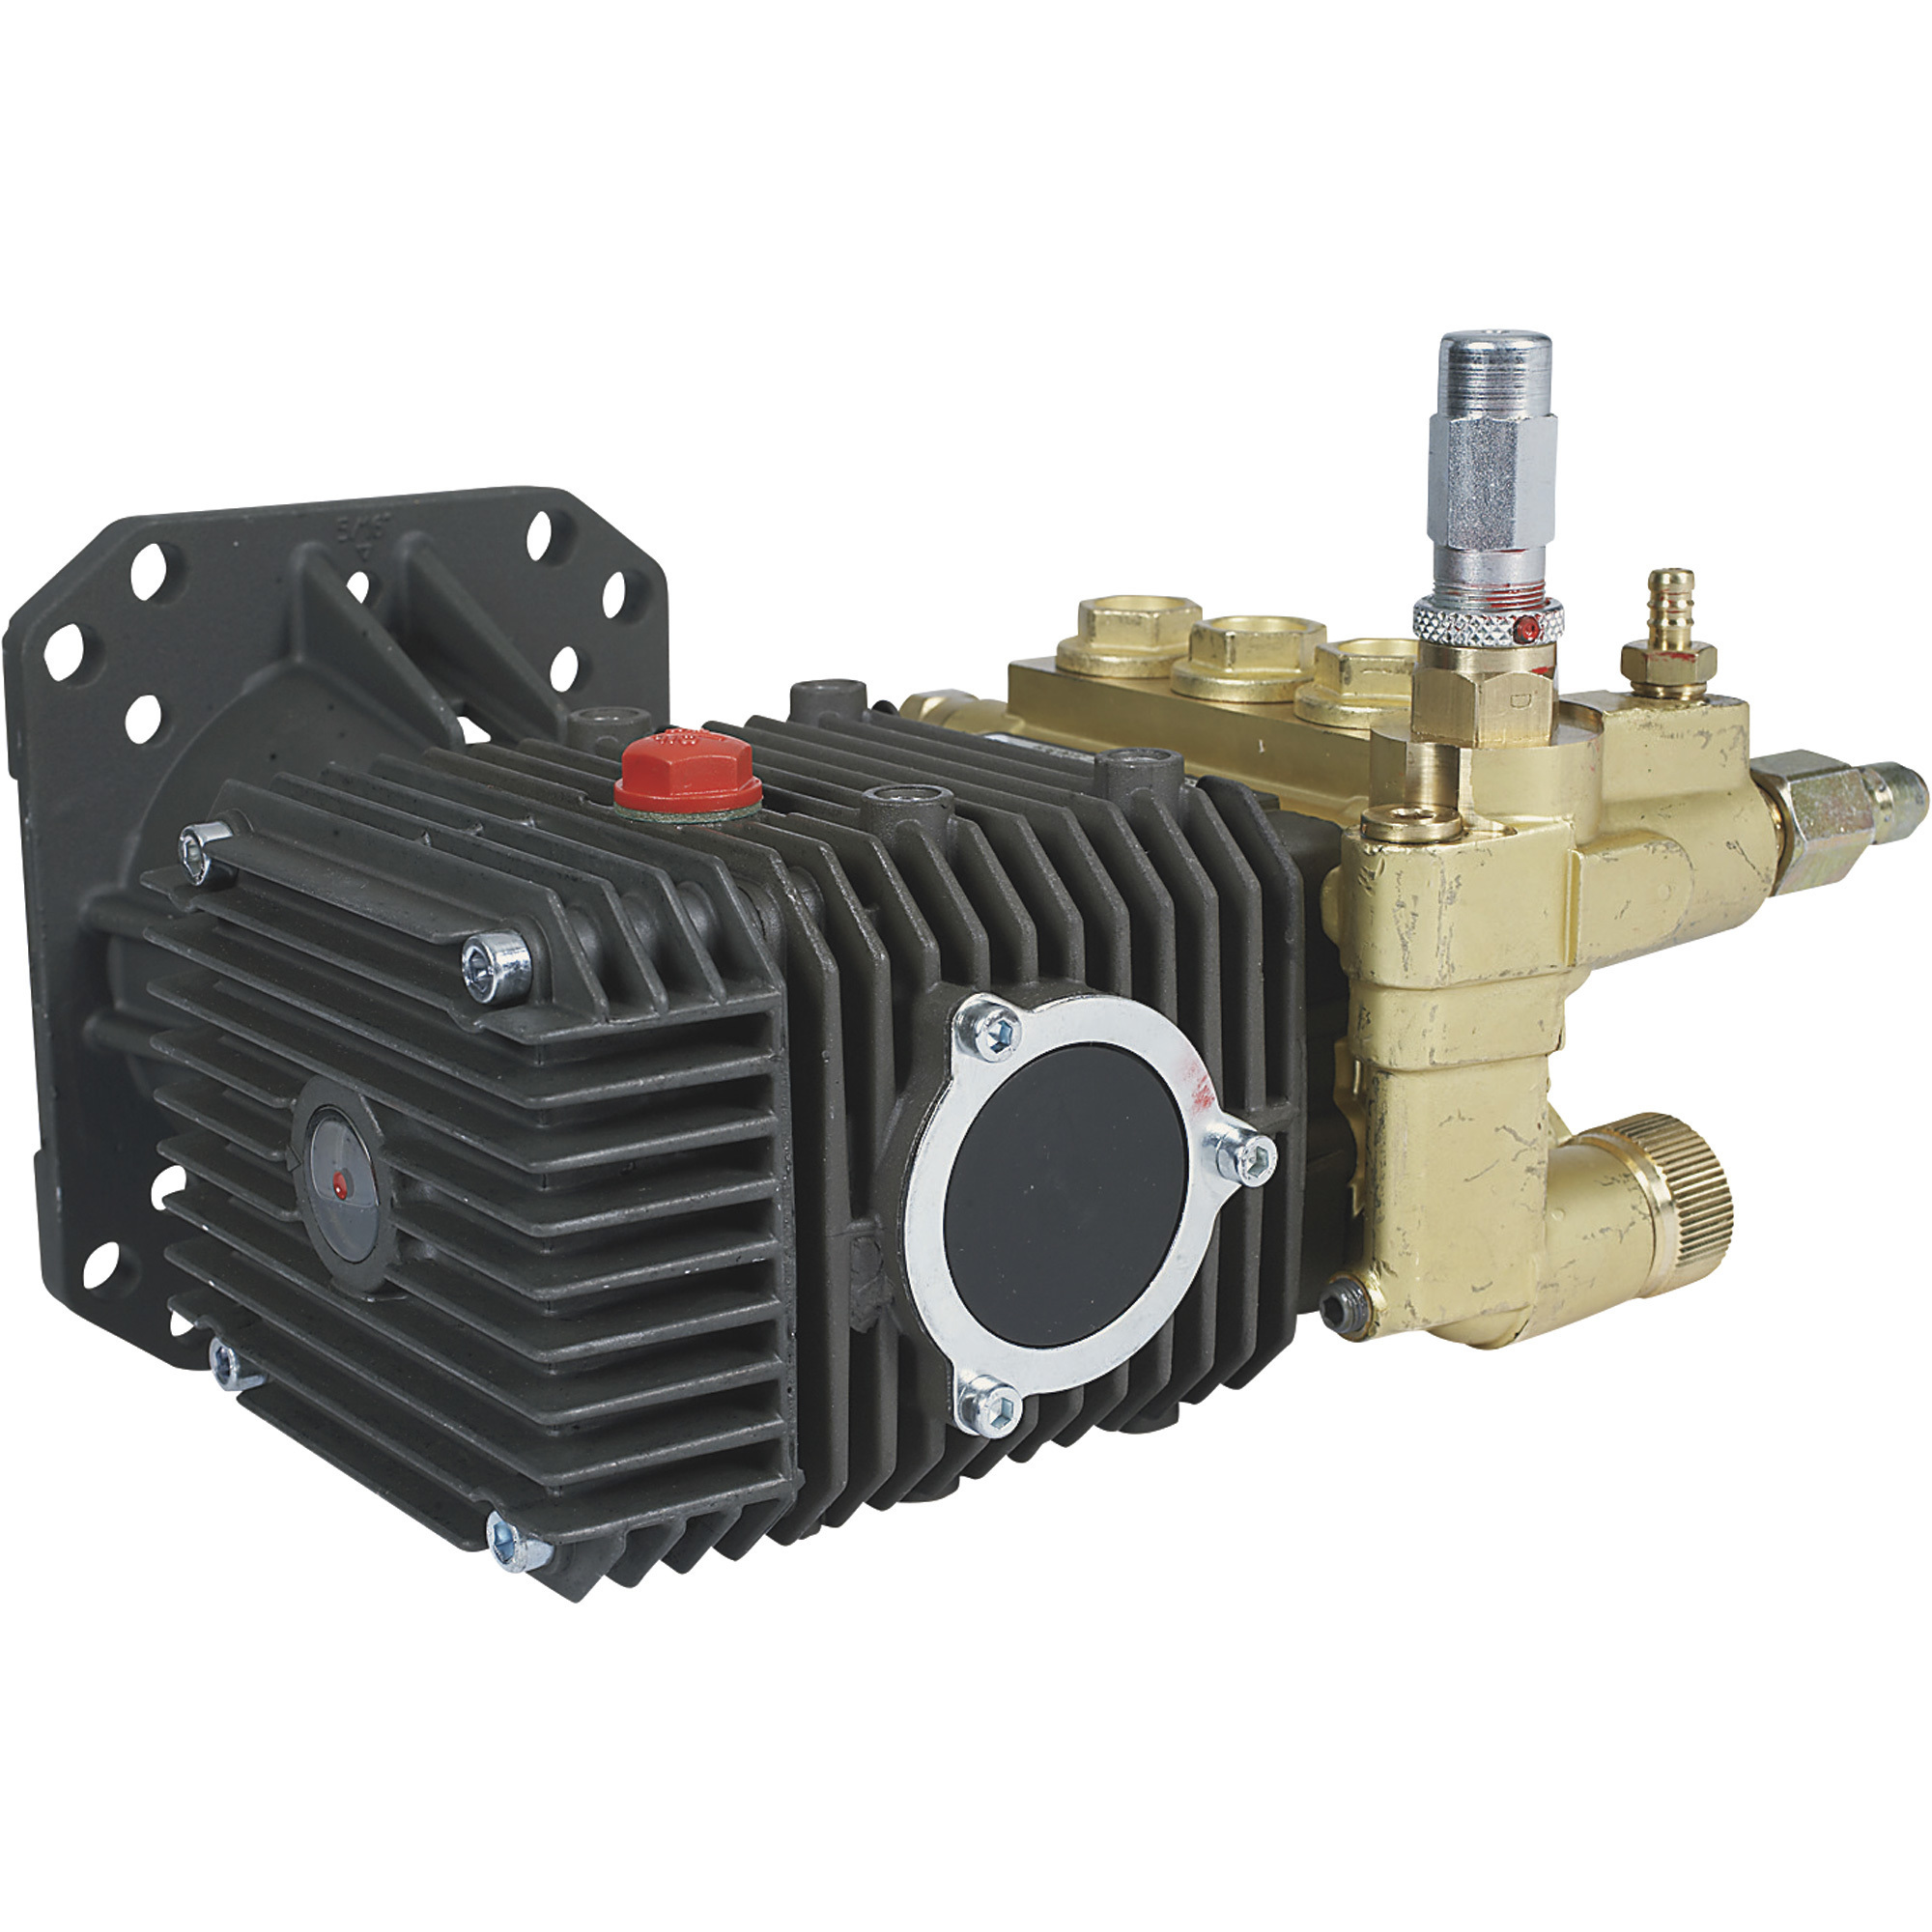 Comet Pump Pressure Washer Pump, 4000 PSI, 3.5 GPM, Direct Drive, Gas, Model ZWDK3540G